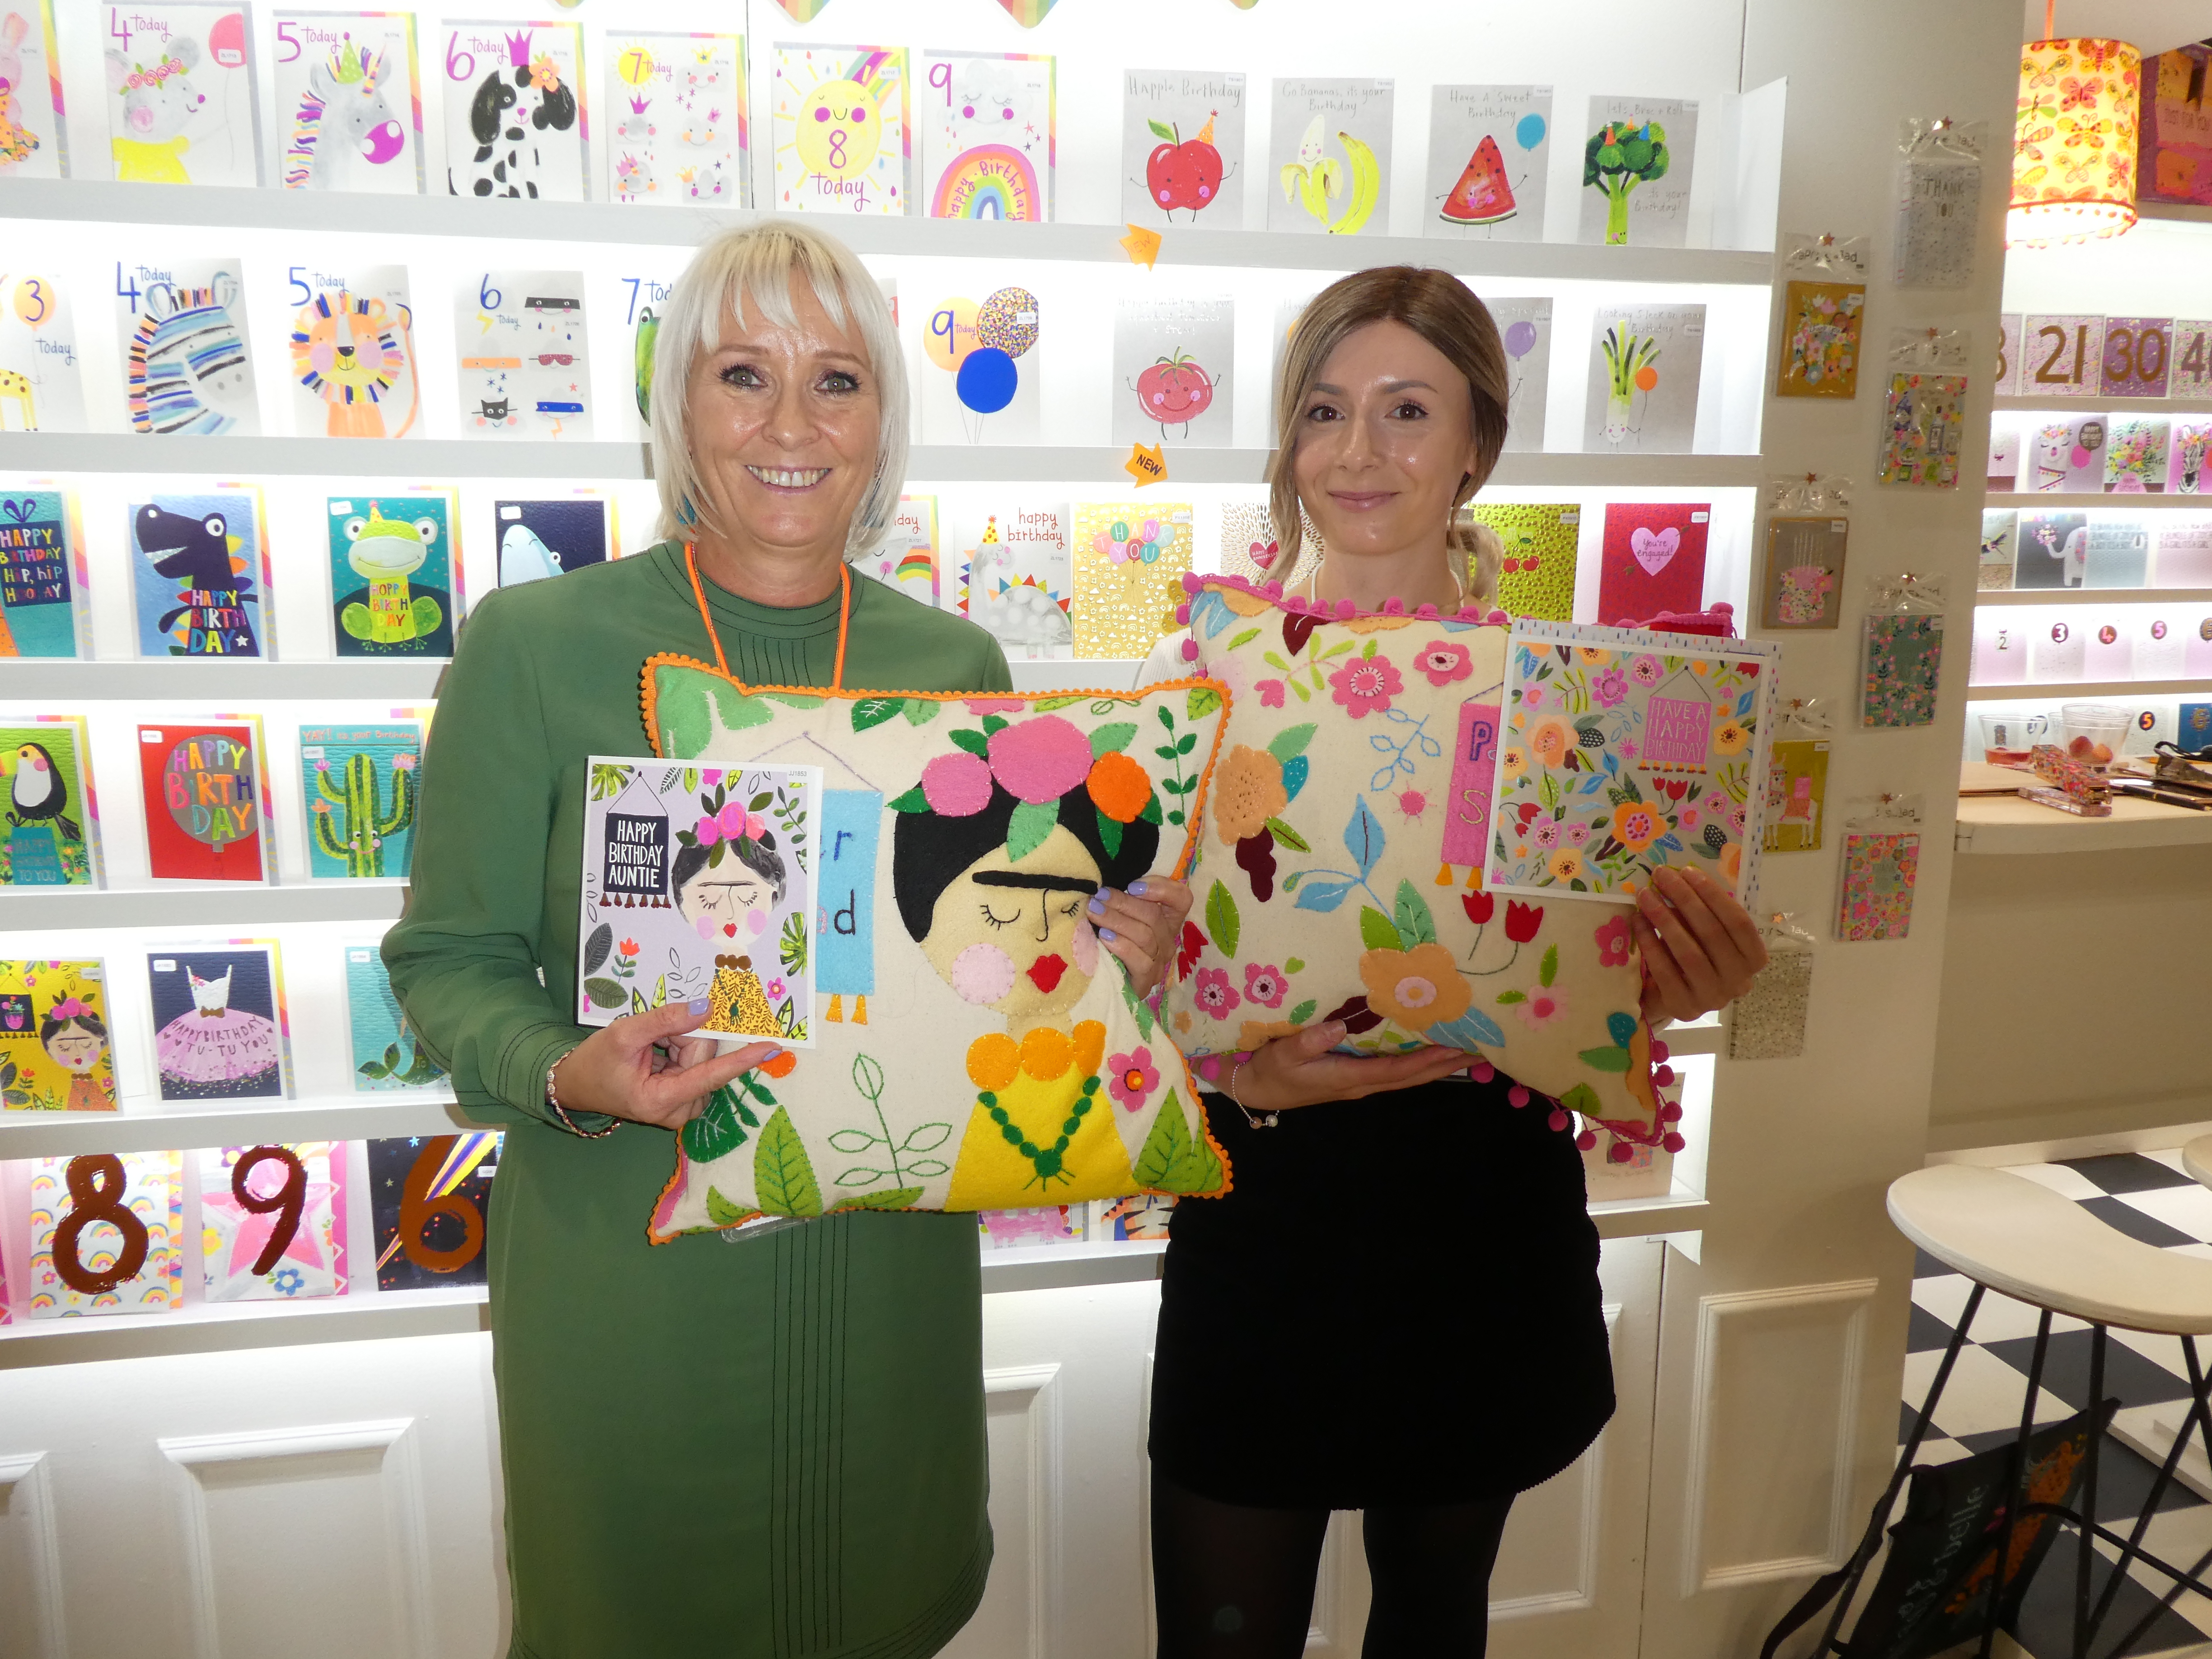 Above: All Paper Salad teamsters were asked to make something (other than cards) that represented the company. The winning entry were some fabulous cushions based on two of the publisher’s cards, which are modeled here by co-founder Karen Wilson (left) and designer Leanne Smith.